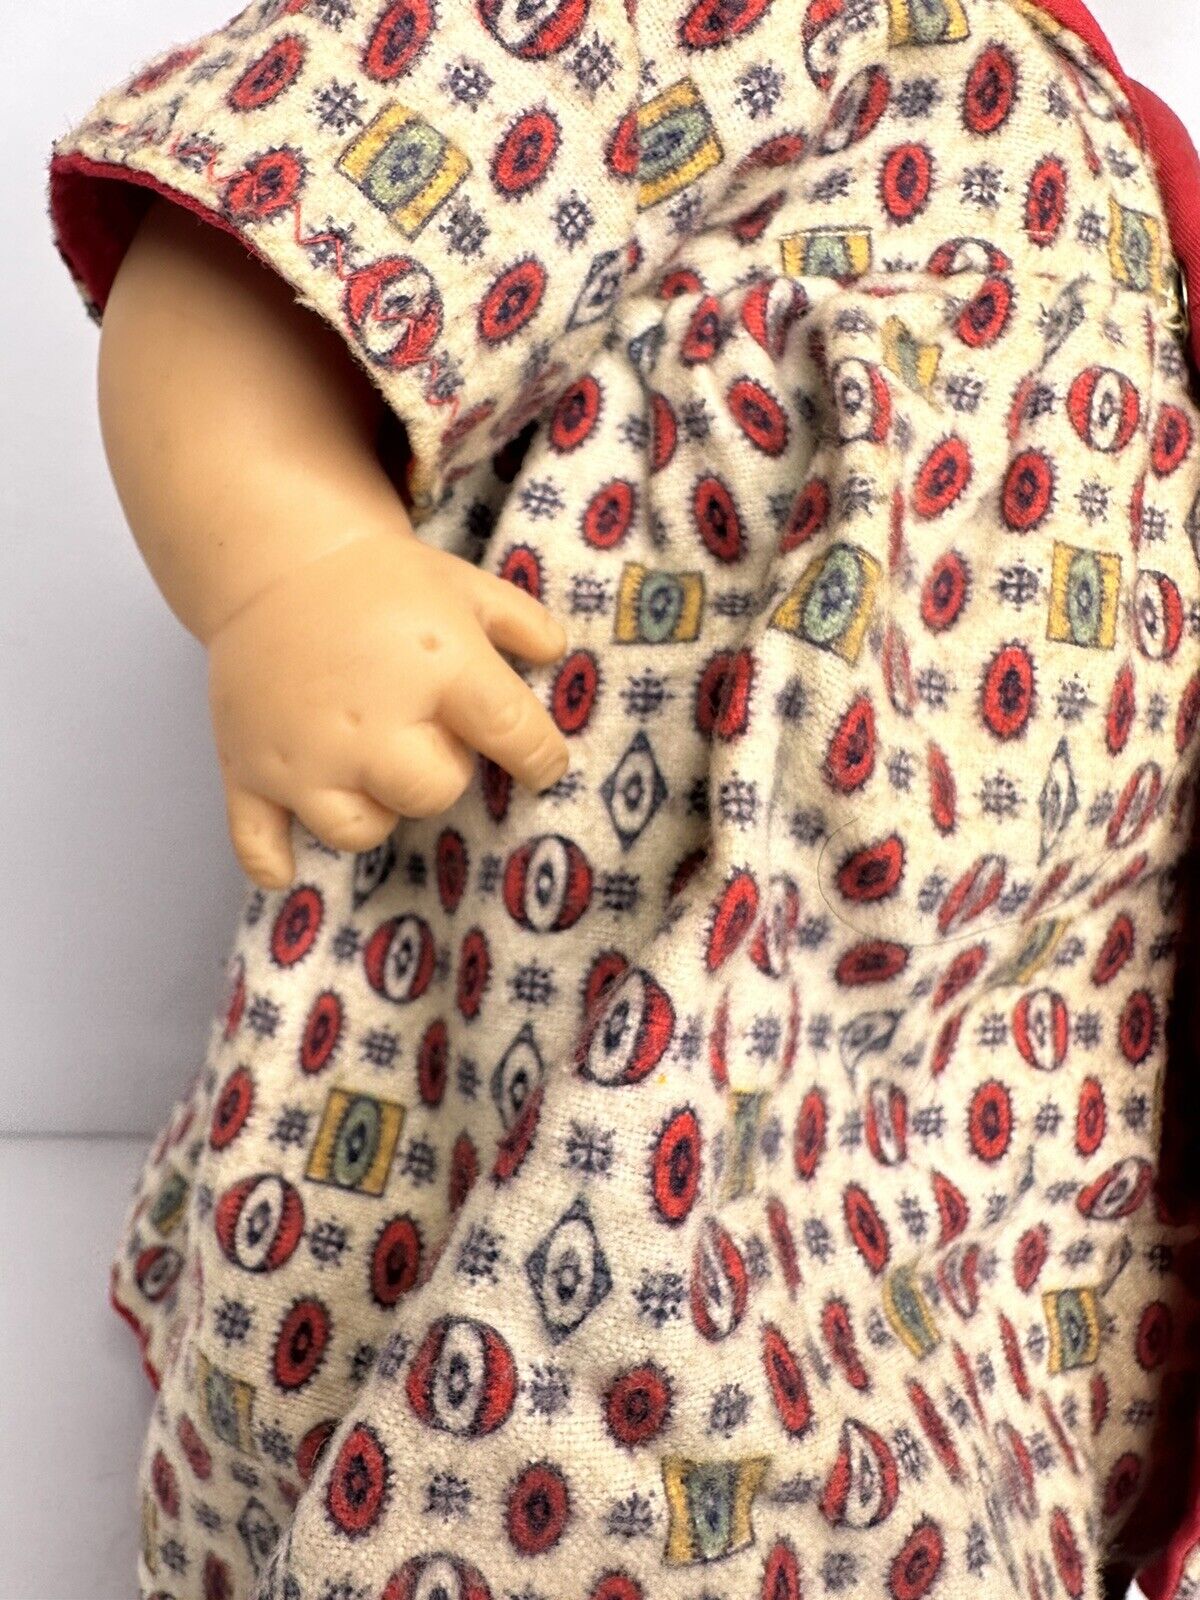 Vintage Horsman Baby Doll with Hazel Eyes | 14" Authentic Collectible in Pajamas - TreasuTiques